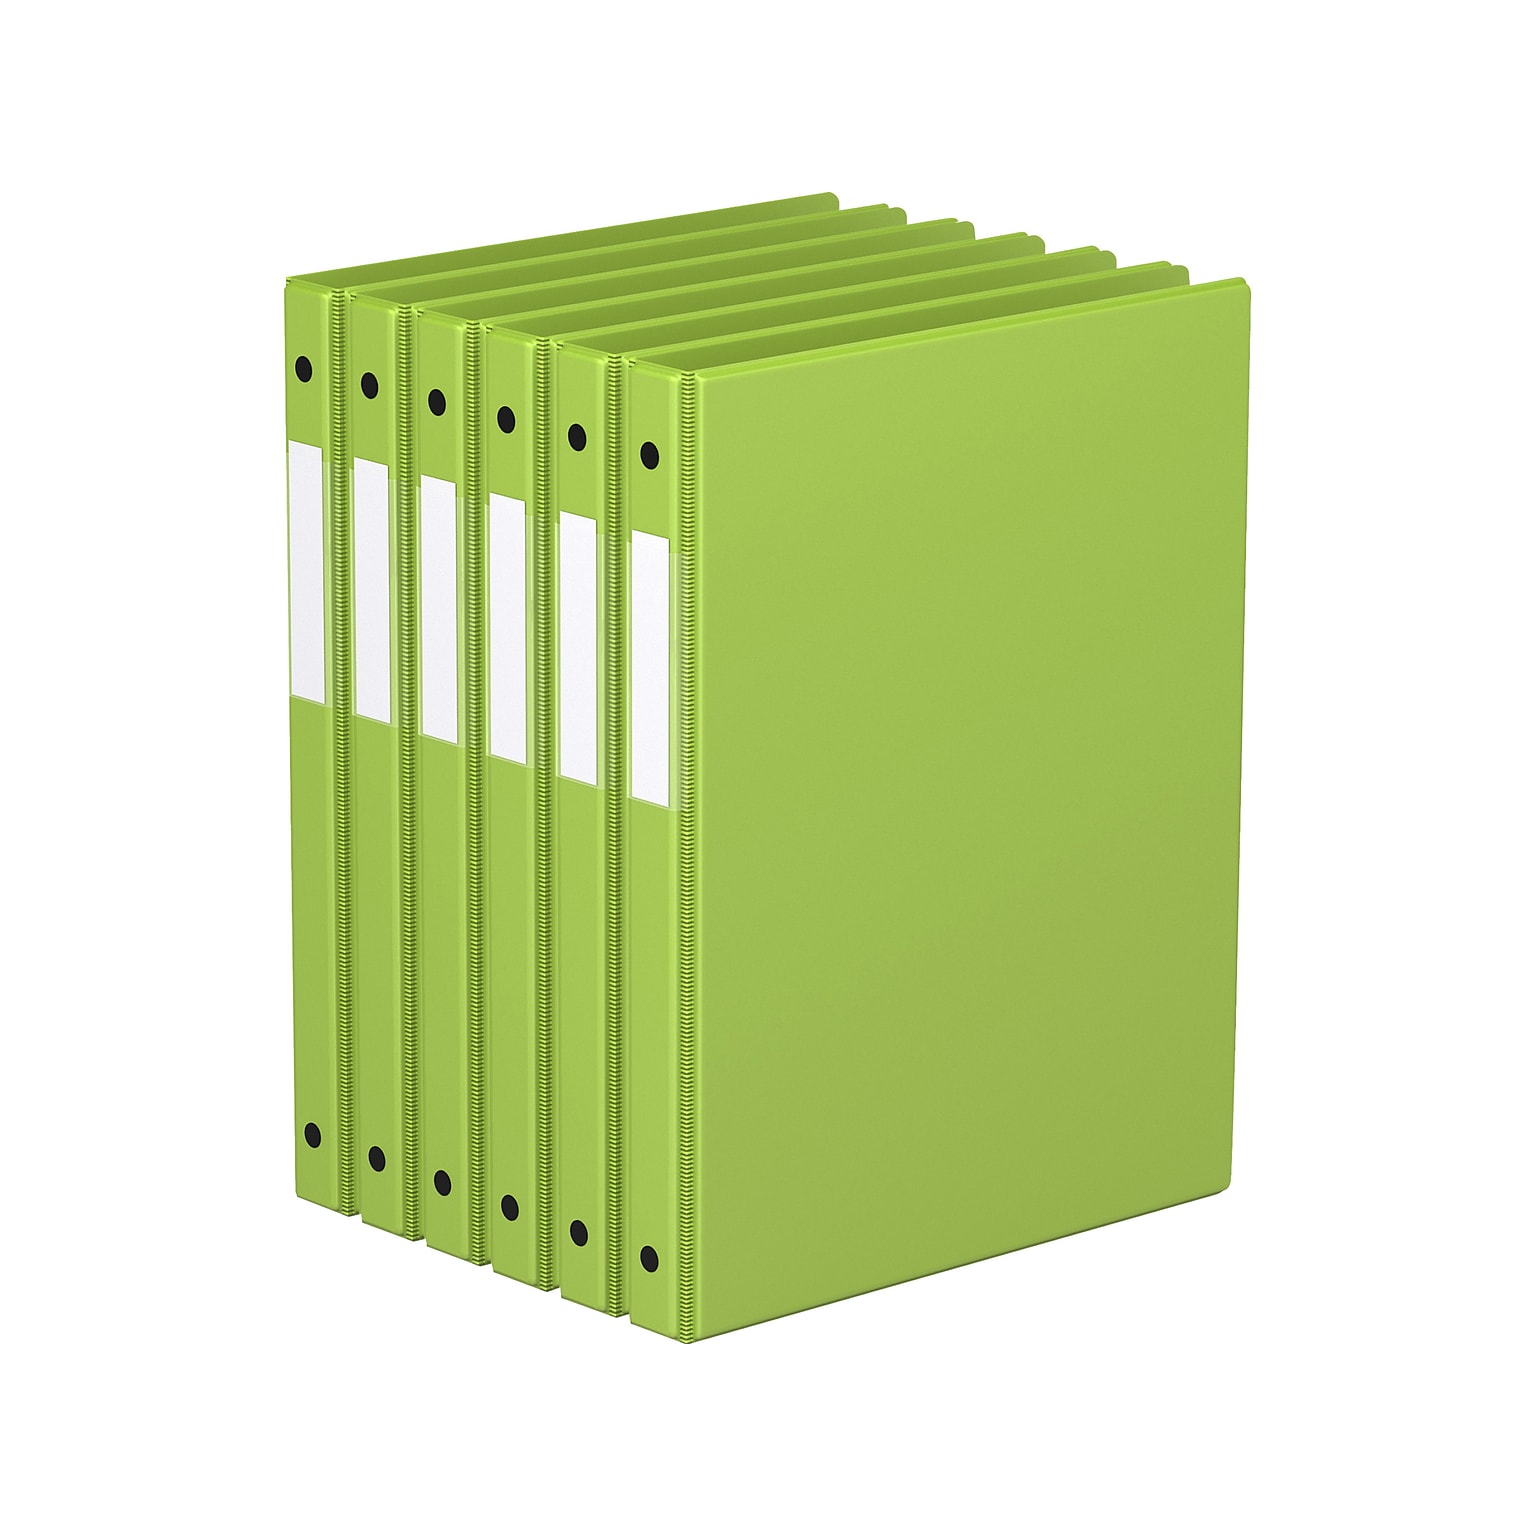 Davis Group Premium Economy 5/8 3-Ring Non-View Binders, Lime Green, 6/Pack (2300-24-06)